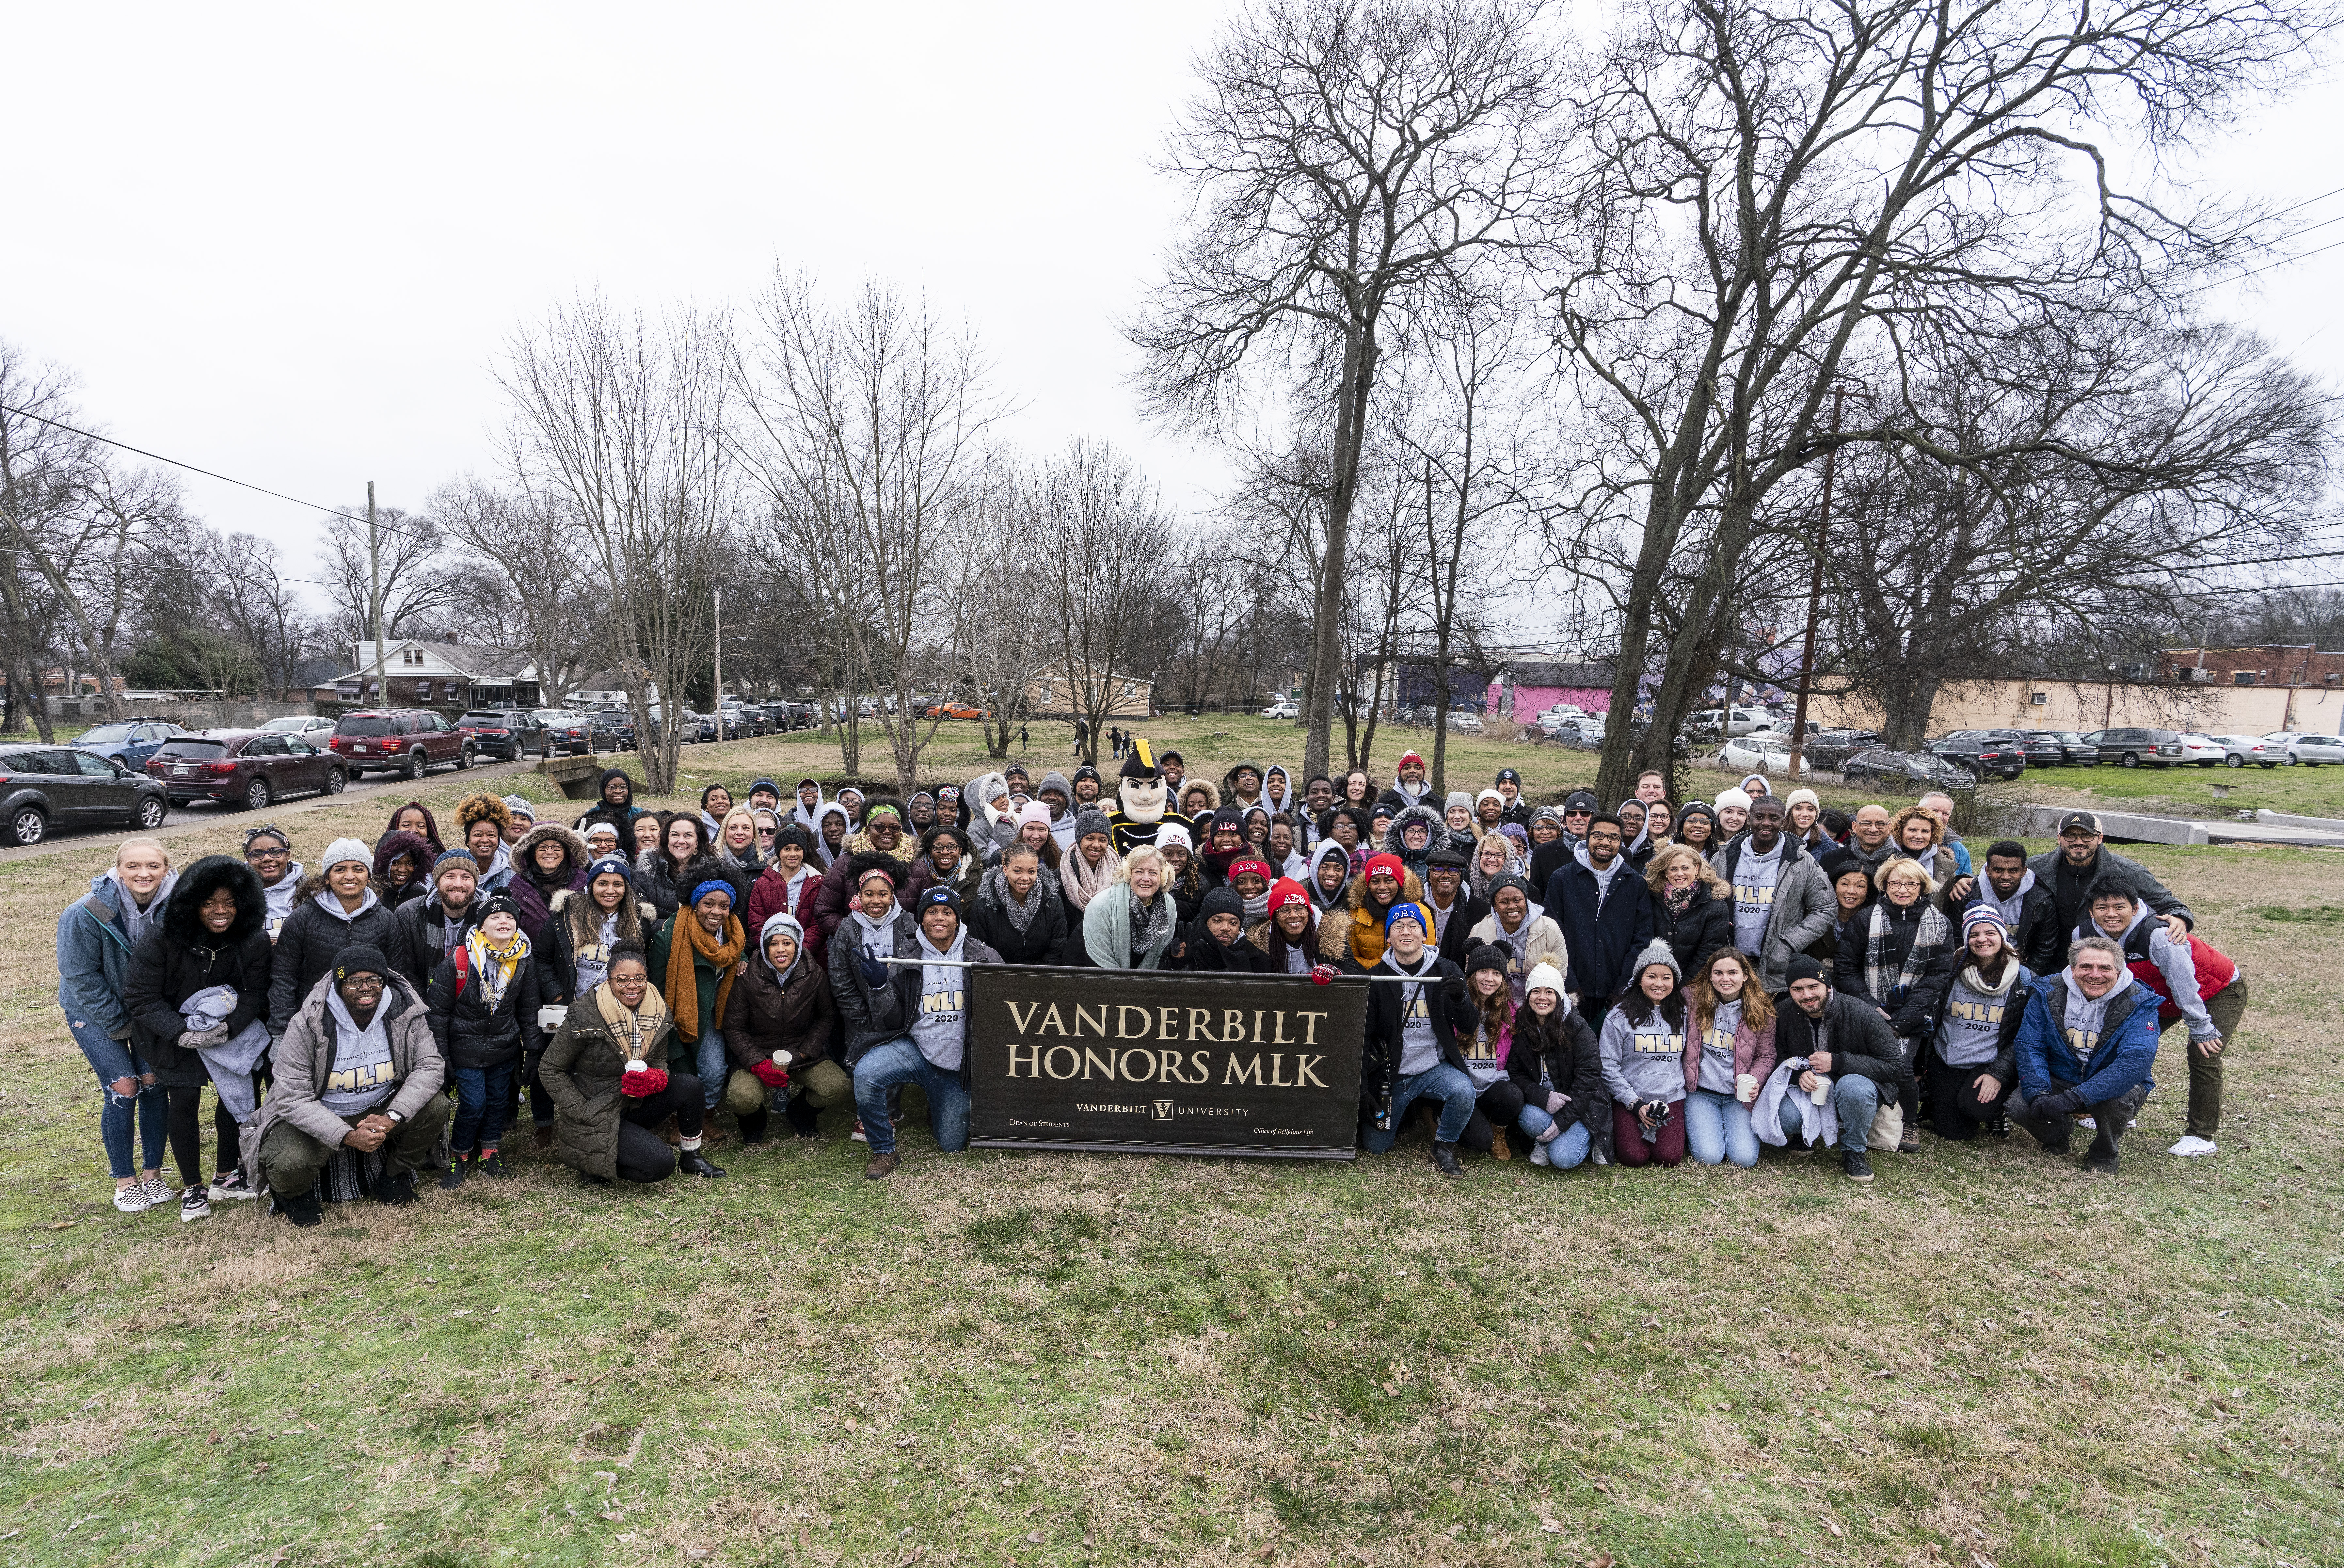 2020 MLK Day March in Nashville starting at Jefferson Street and finishing at TSU’s Gentry Center. Vanderbilt students, faculty, staff, and administrators took part in the event commemorating Martin Luther King Jr. (Vanderbilt University/Joe Howell)